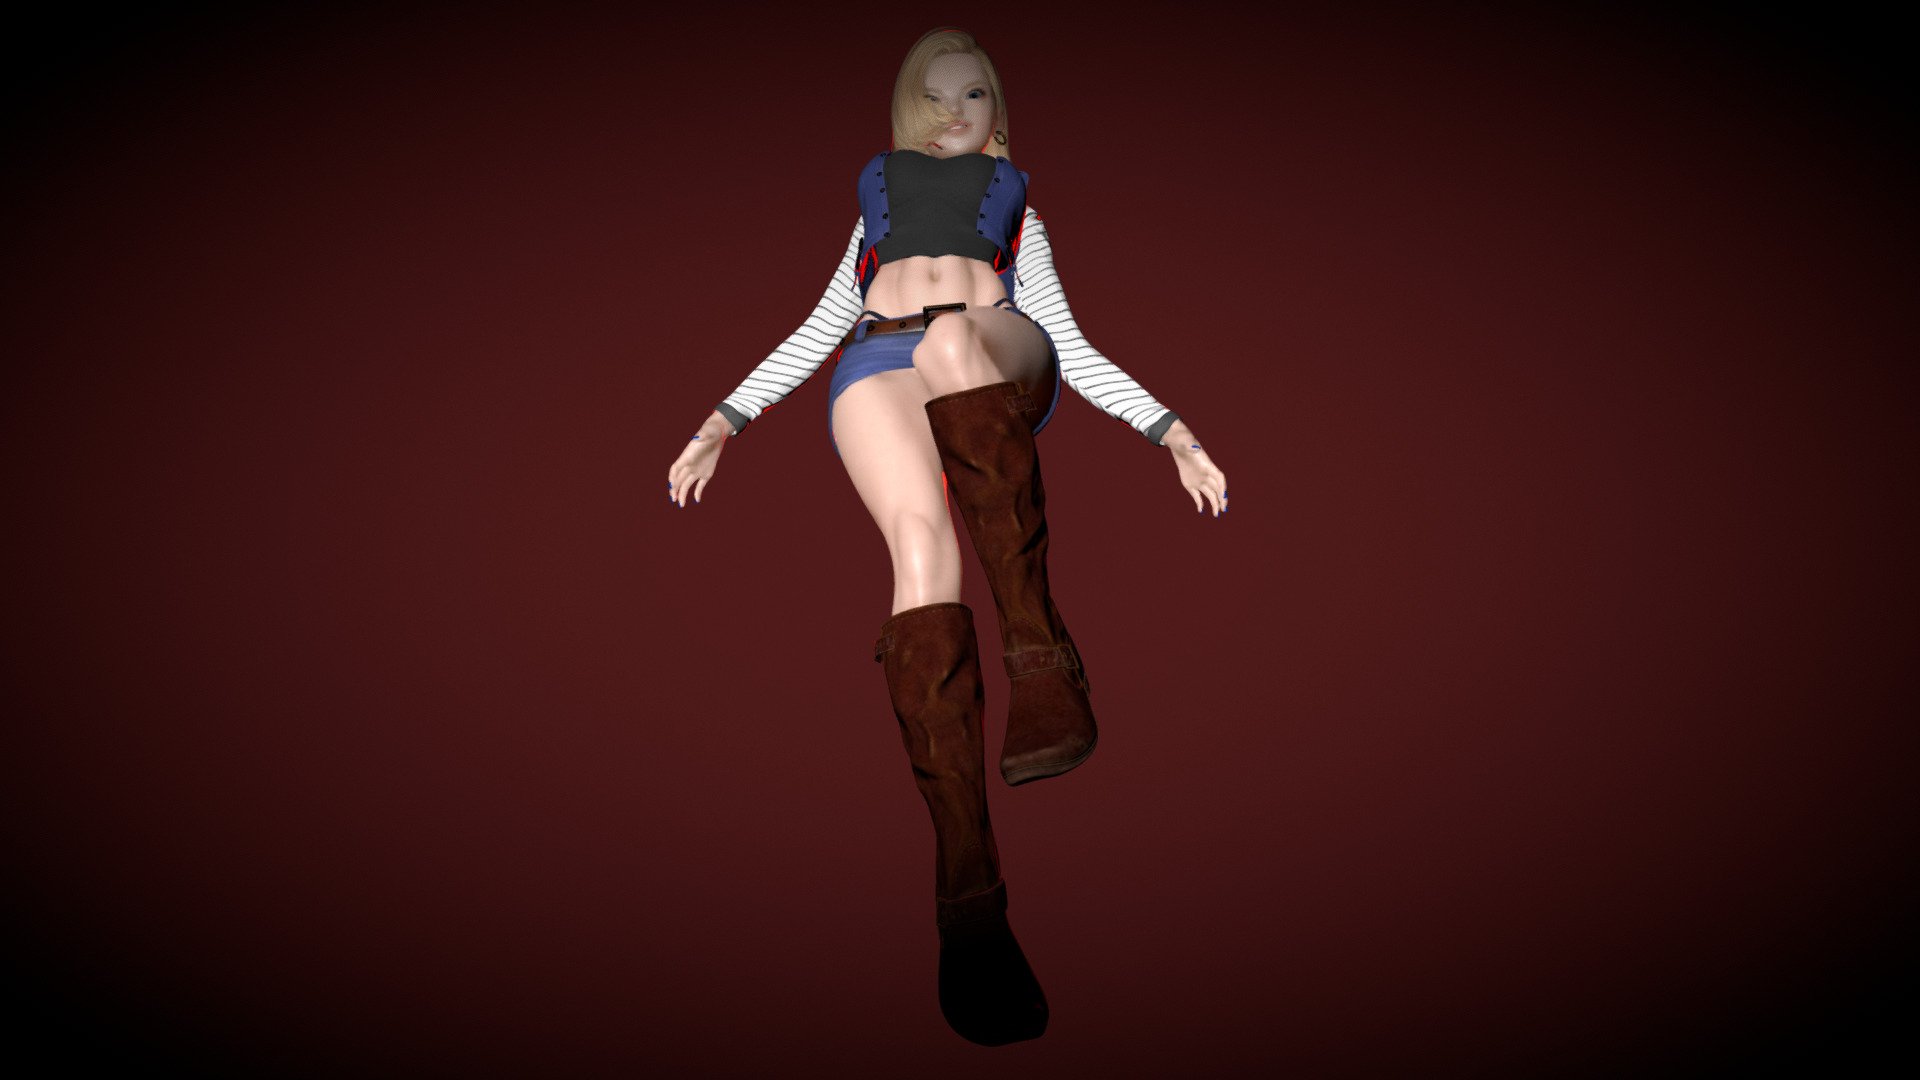 Custom model, NSFW and with several outfits On my Patreon you can download this and all the NSFW models I create, I would really appreciate the support patreon.com/esejota 
Credits to whom it corresponds - Android 18 (Live Action) - 3D model by EseJota11 (@EseJota) 3d model